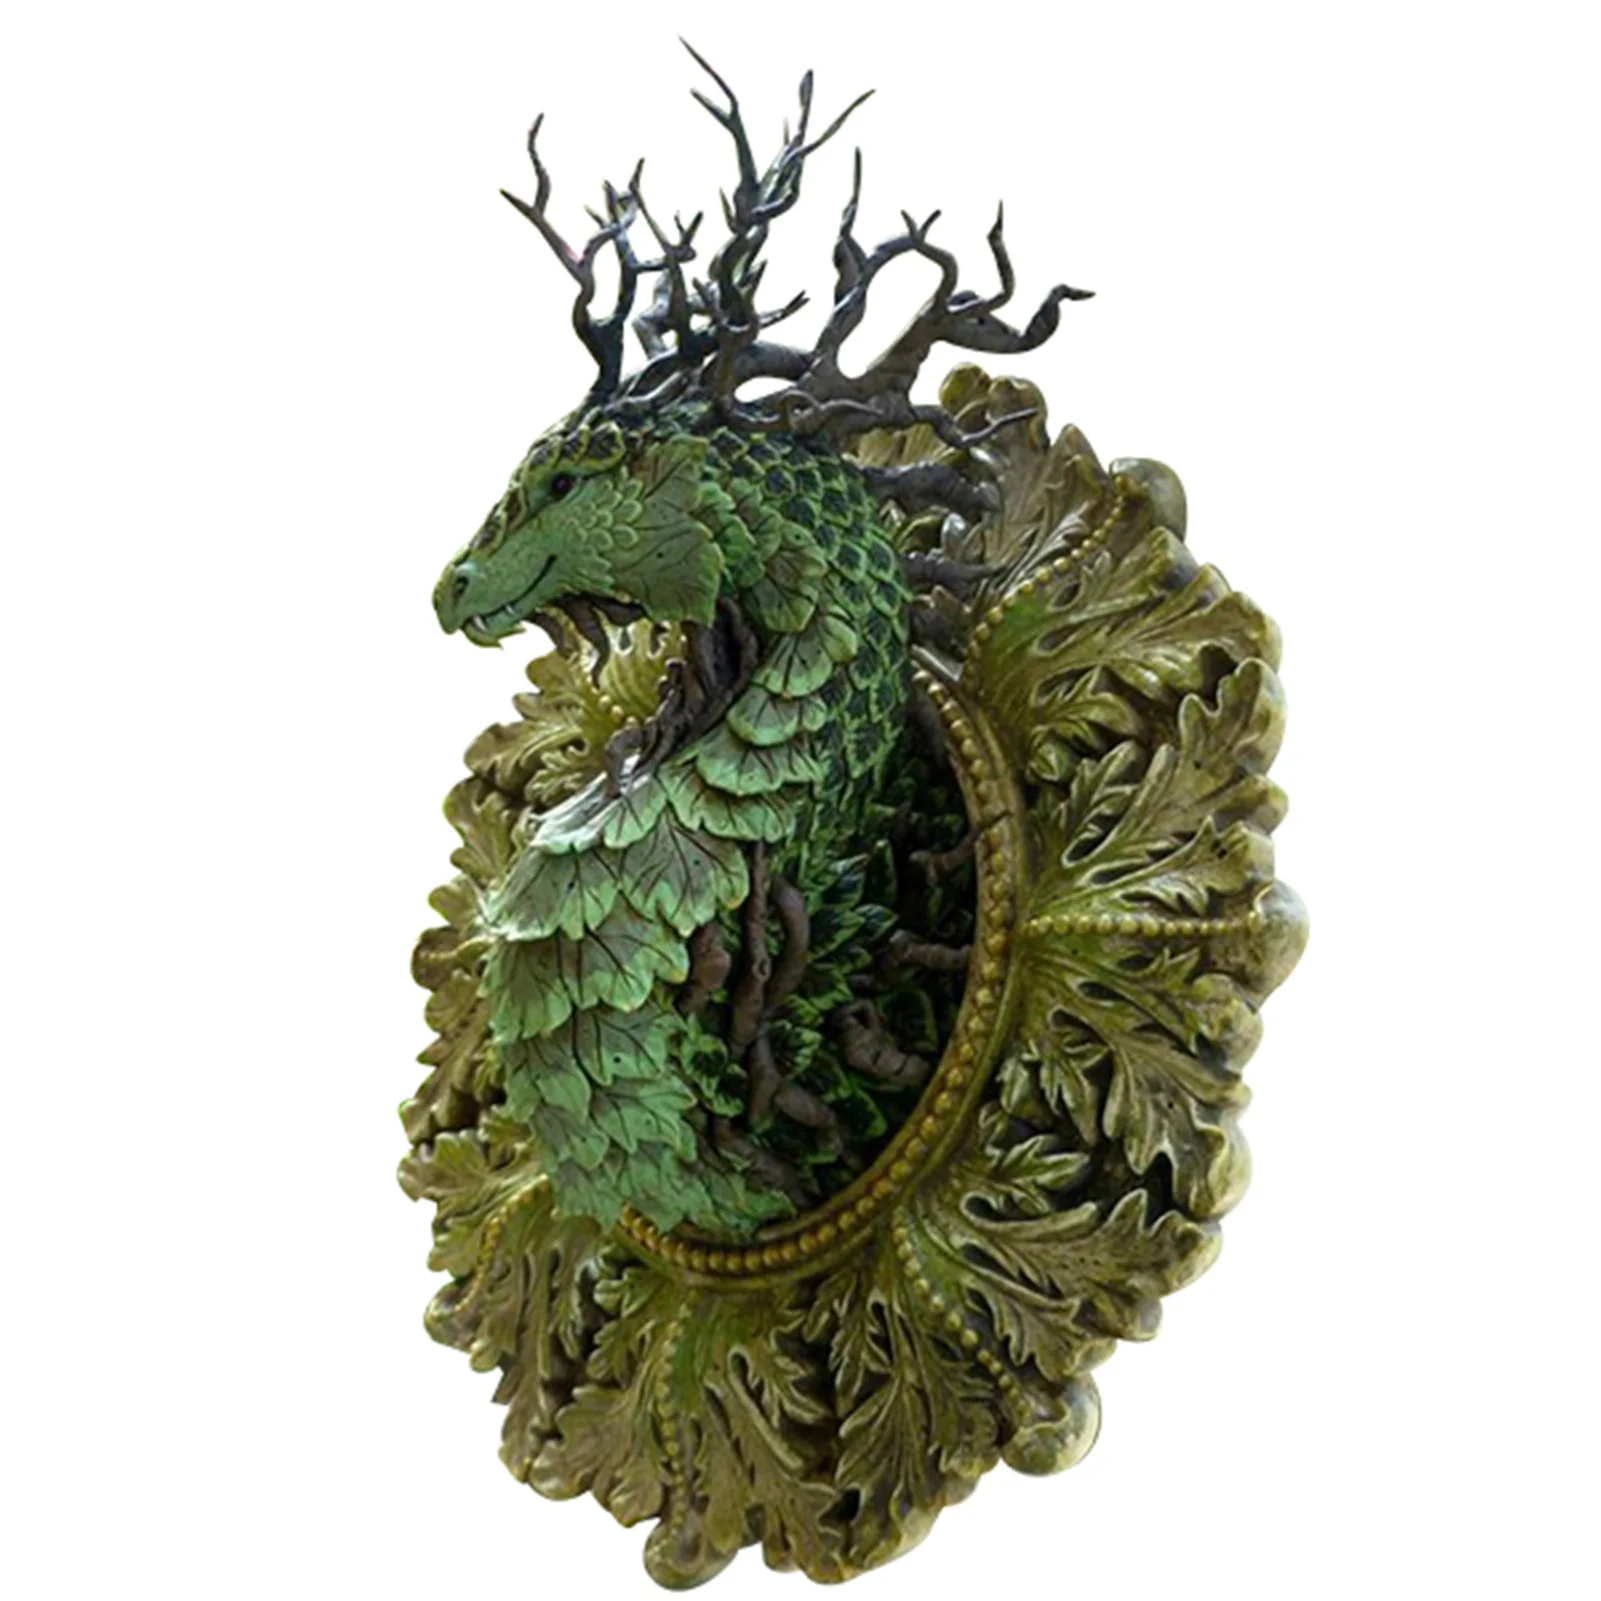 Forest Dragon Resin Statues Wall Decor for Home Indoor and Outdoor Patio Porch for Dragon Lovers 15x15cm TS2 images - 6